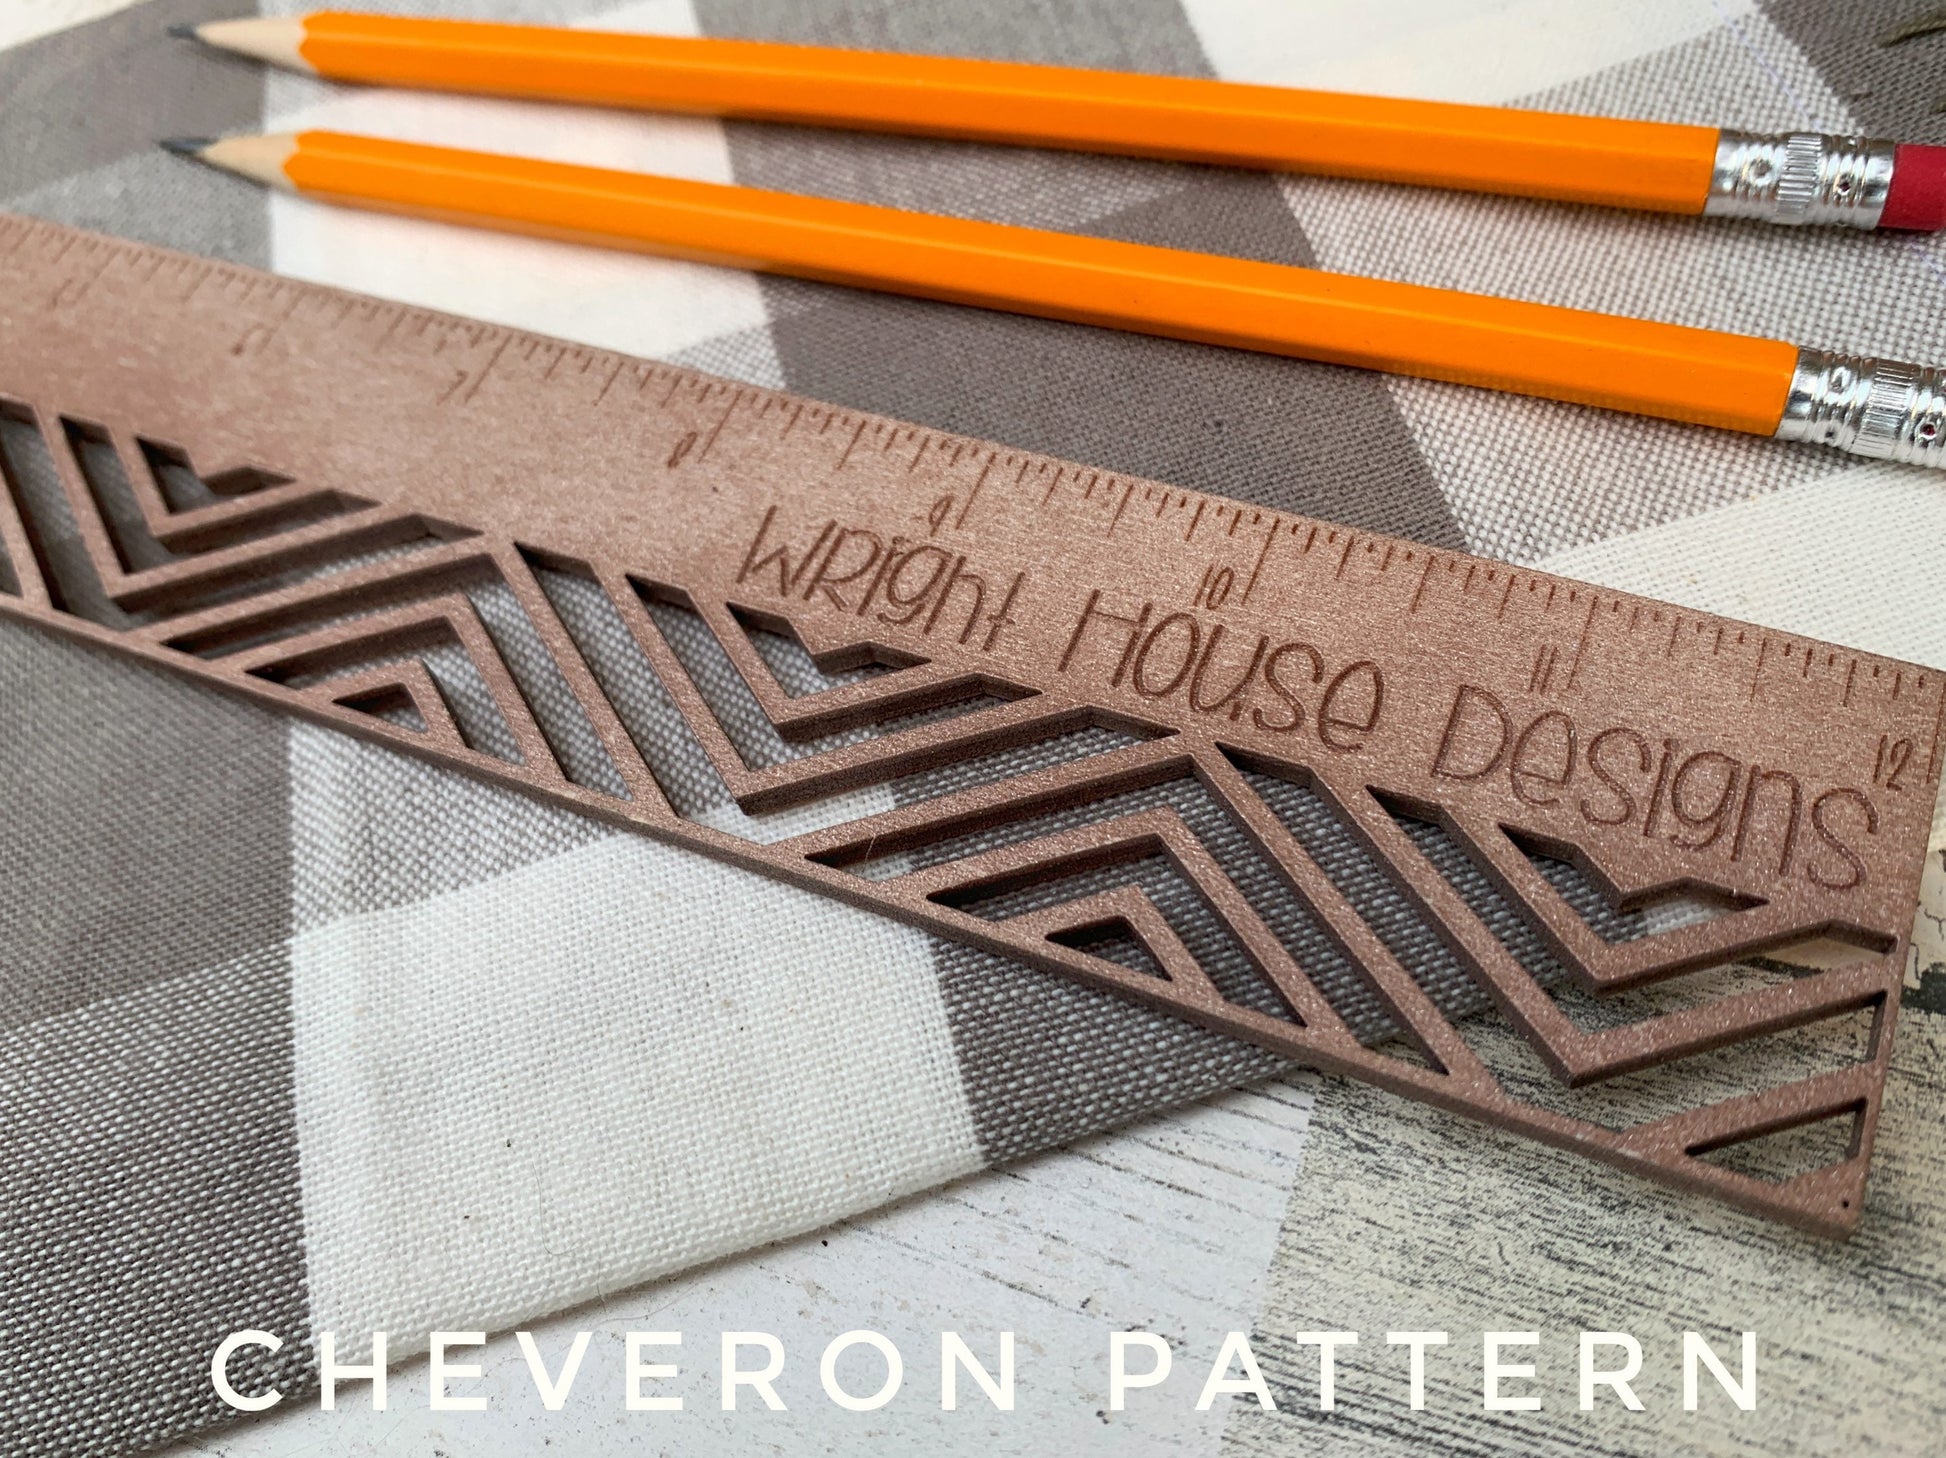 Geometric Pattern Ruler Set For Laser Cutting - Files for Crafters Makers and Product Making - Digital SVG Cut Files For Glowforge Lasers